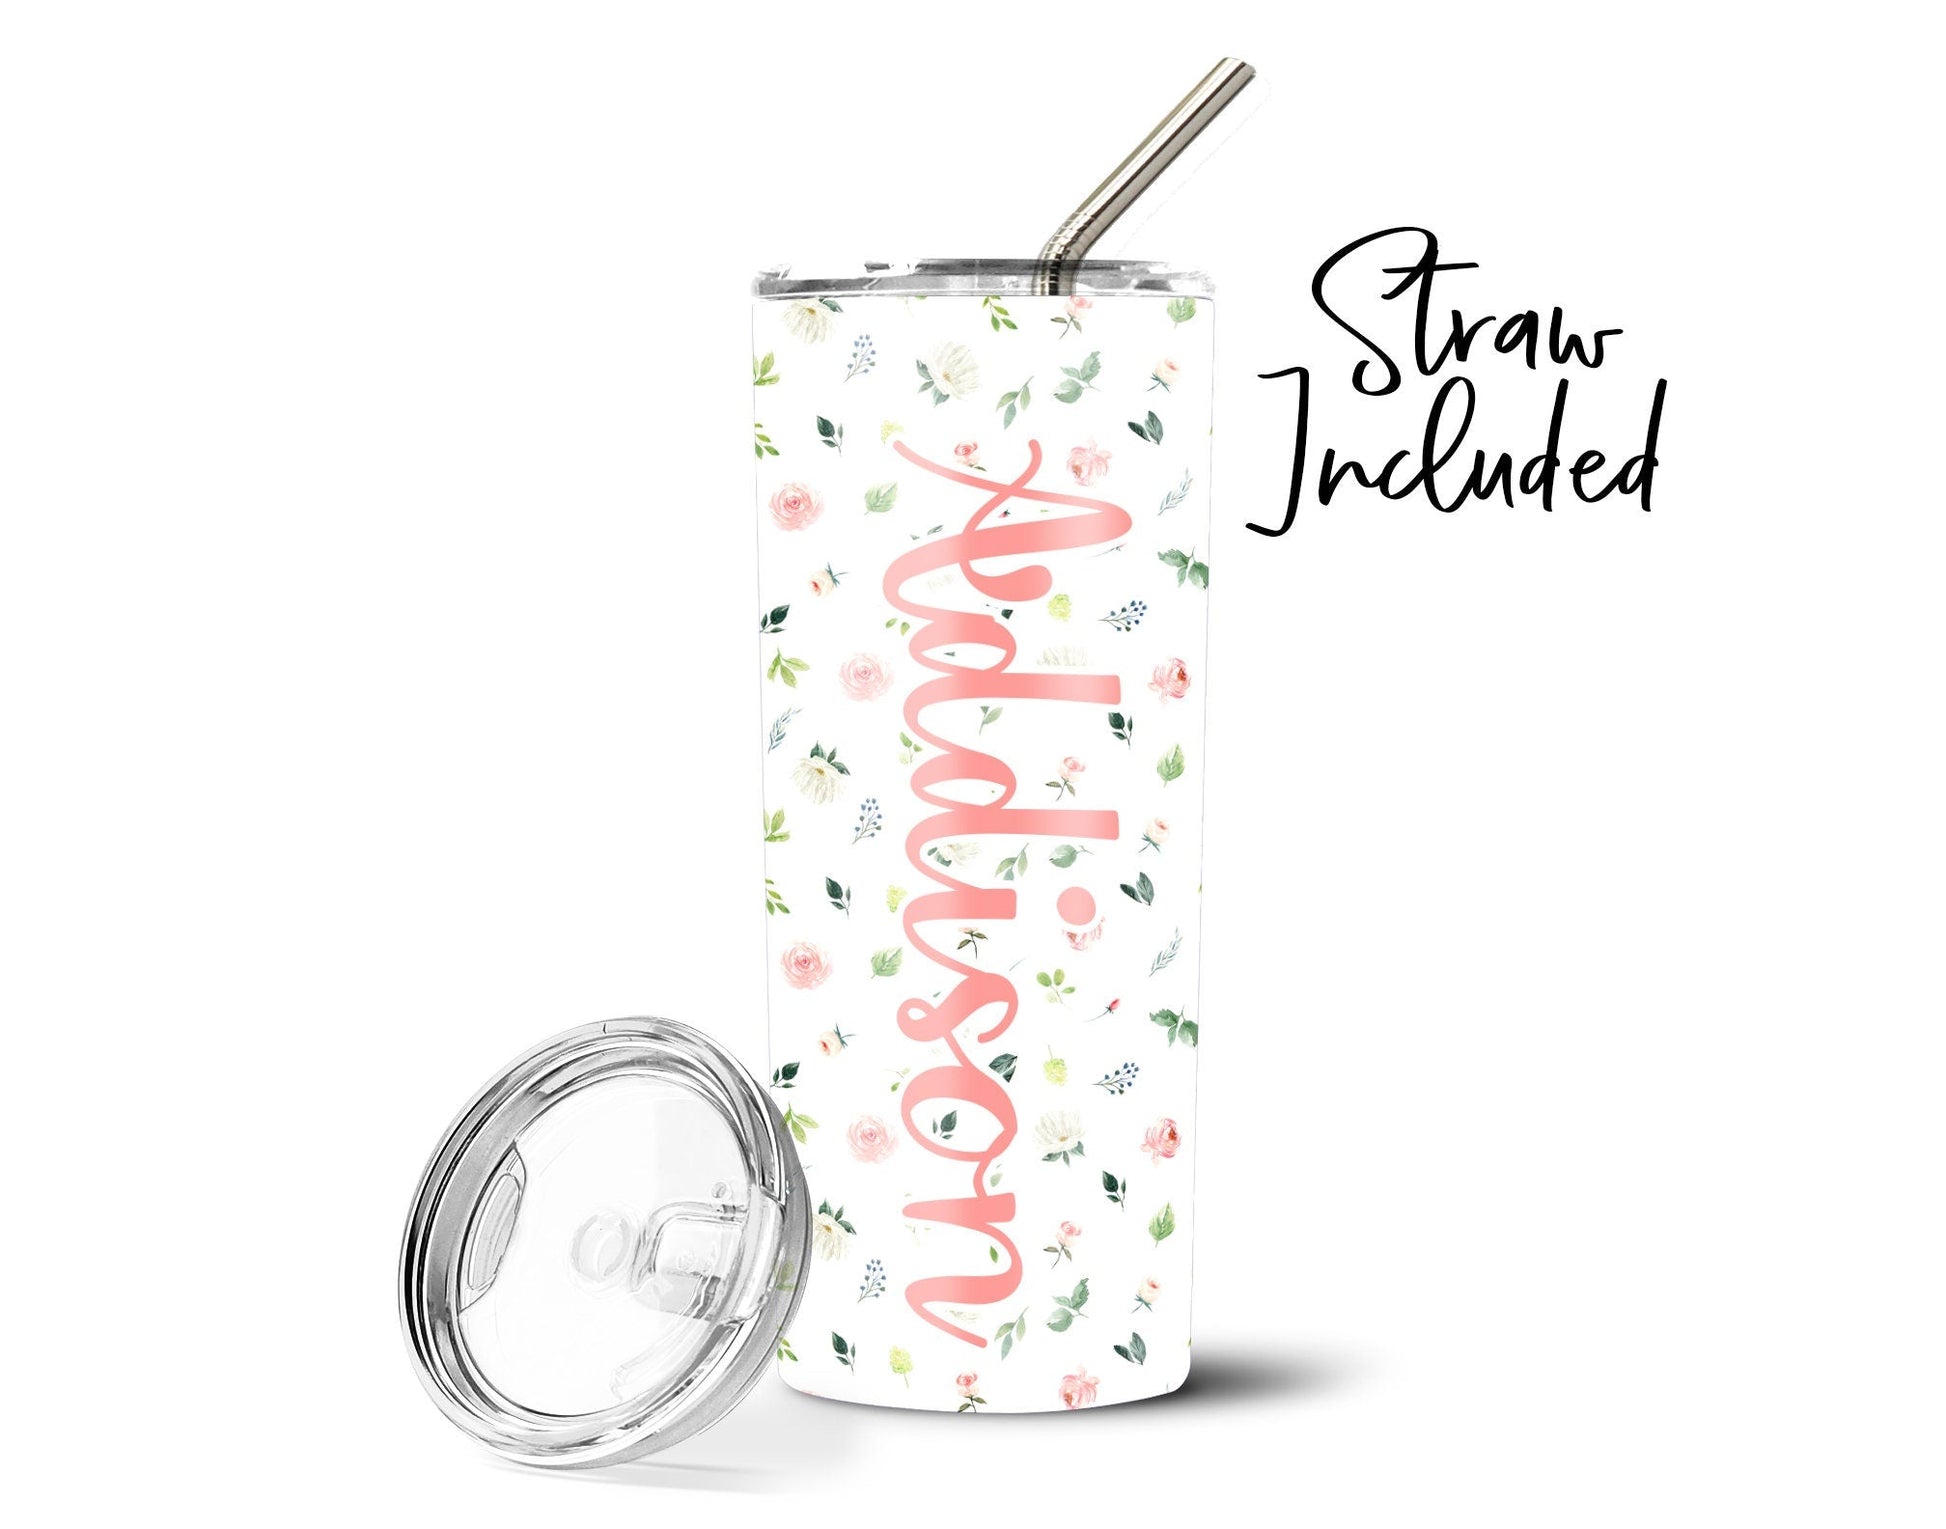 Pretty Best Teacher - Floral - Pink Stainless Steel Water Bottle with Straw